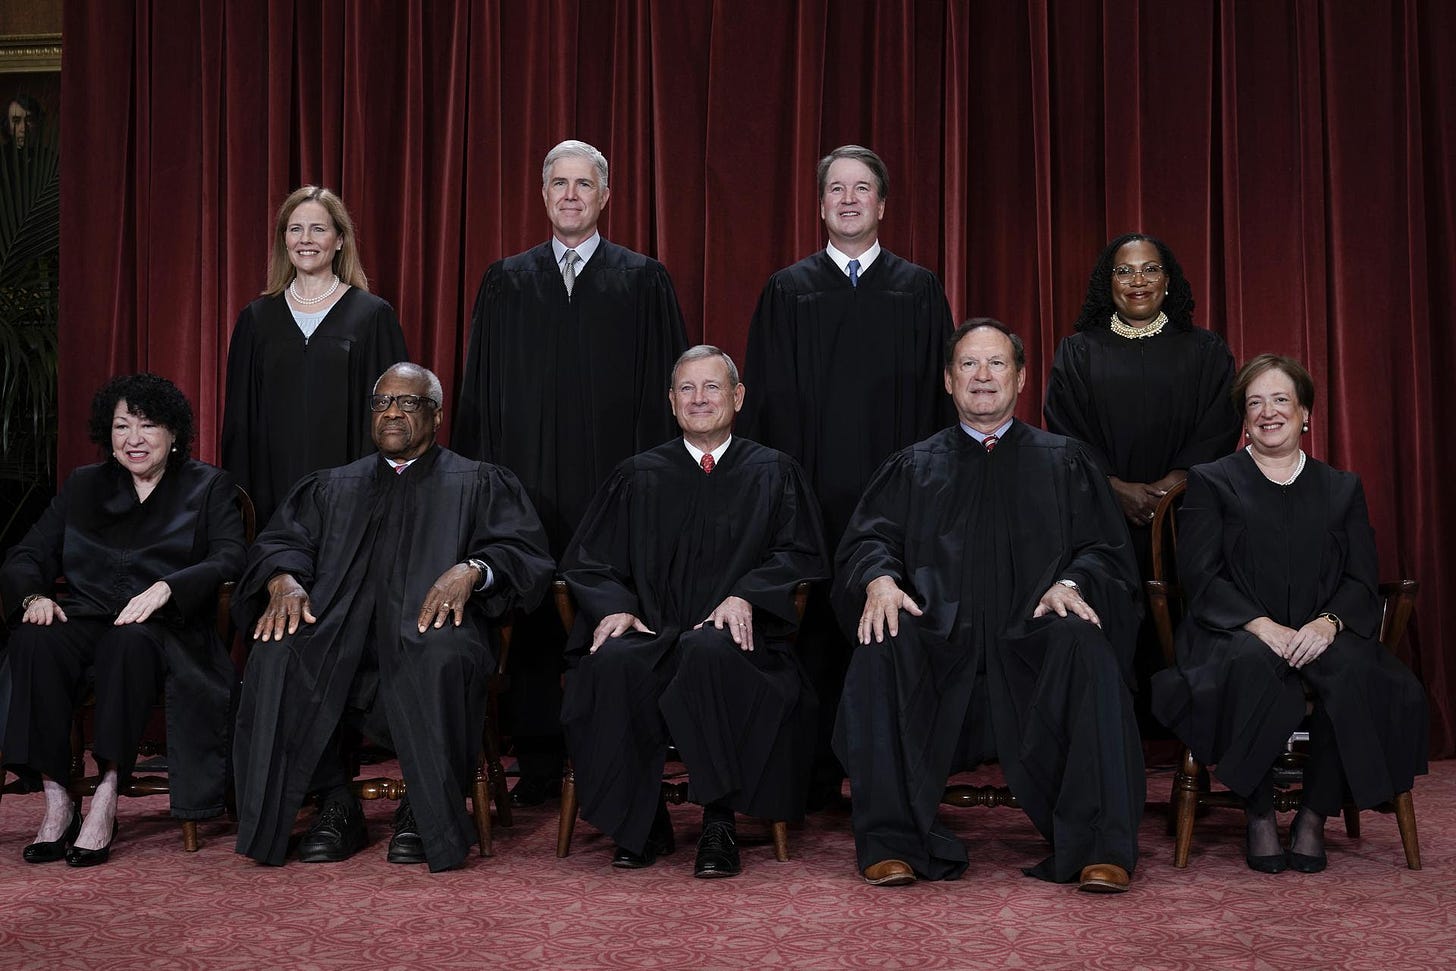 AP Morning WireMembers of the Supreme Court pose for a group portrait 